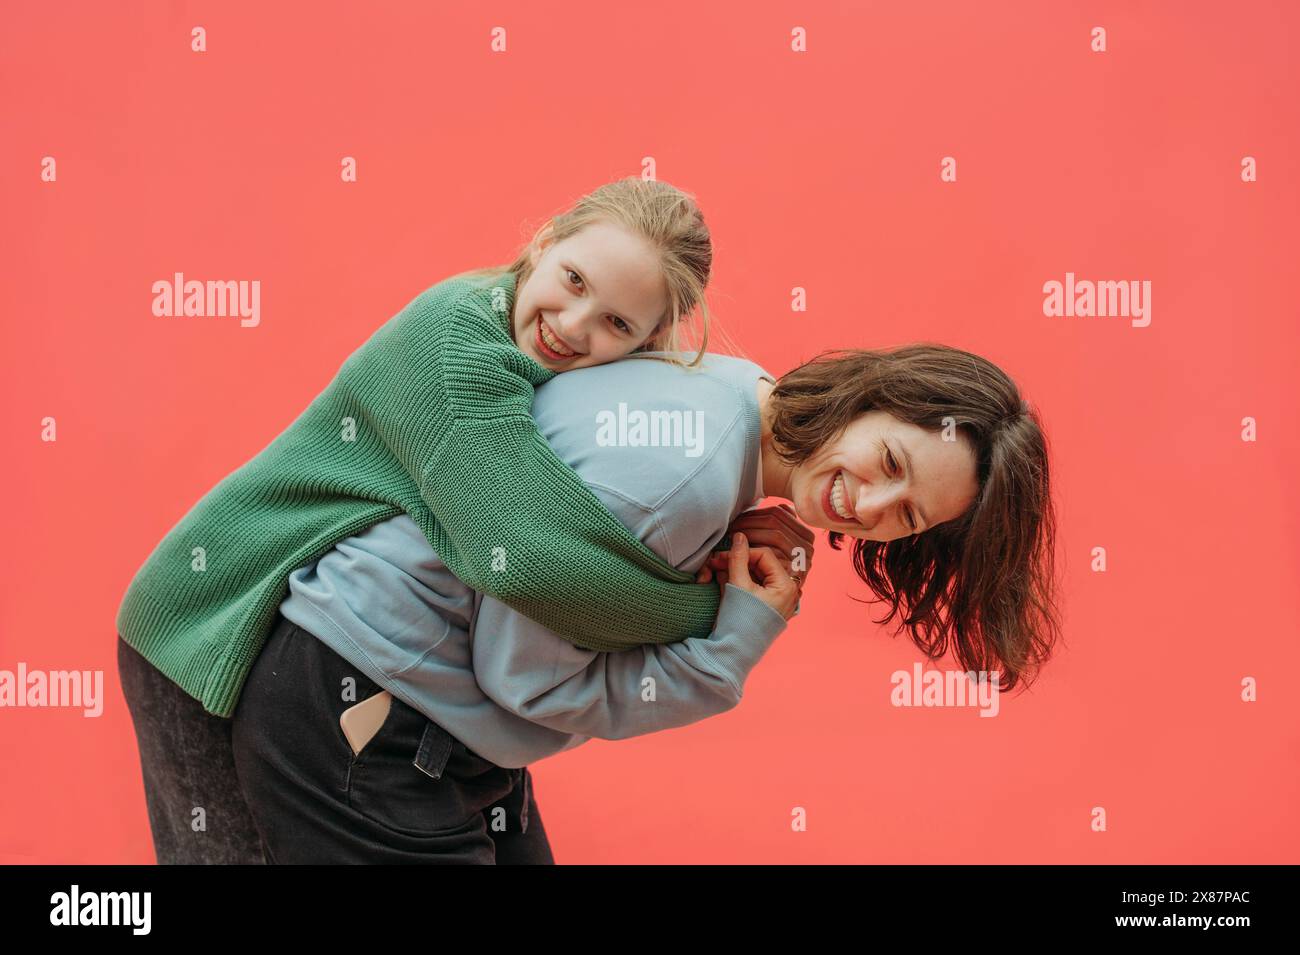 Daughter embracing mother against red background Stock Photo